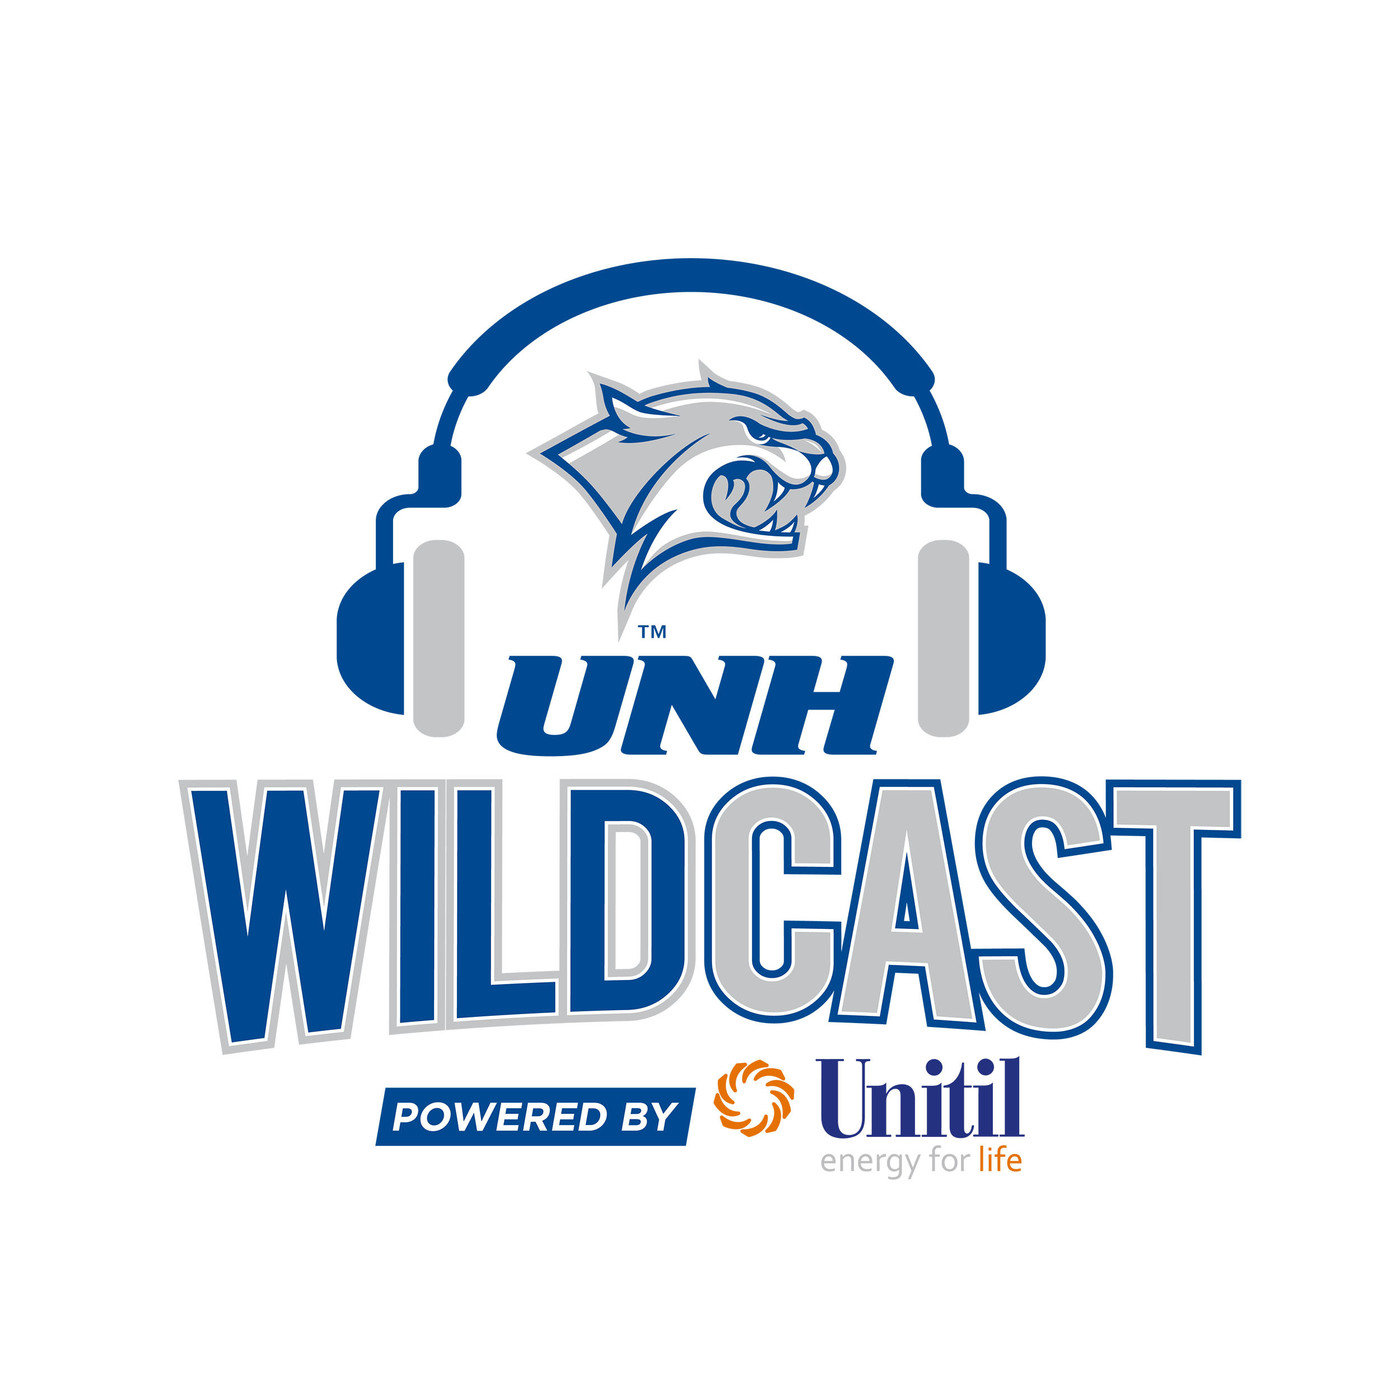 UNH Wildcast